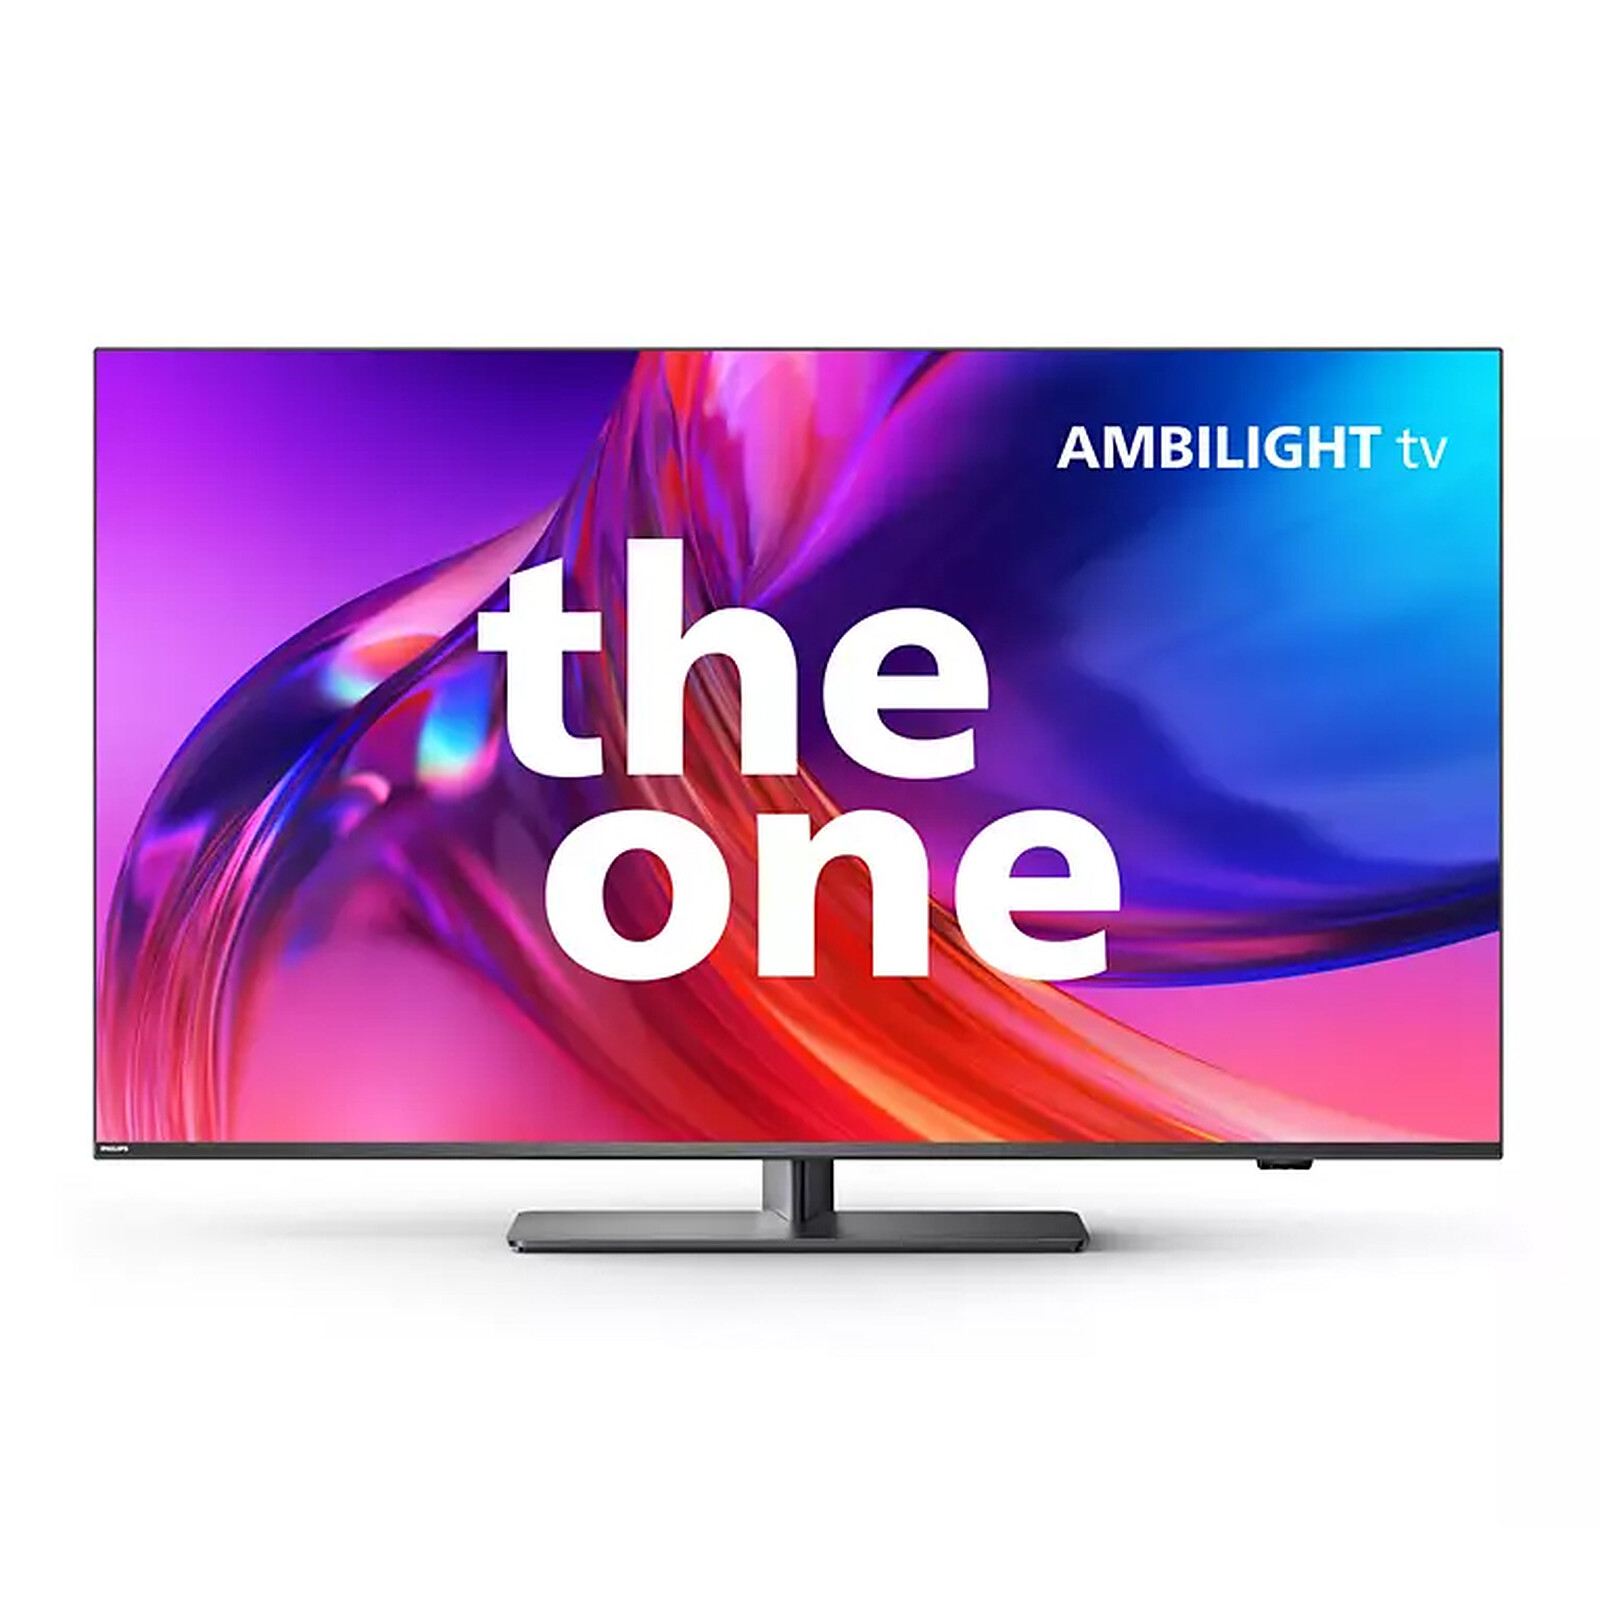 Philips The One 50PUS8808/12 - 3-year TV - LDLC warranty